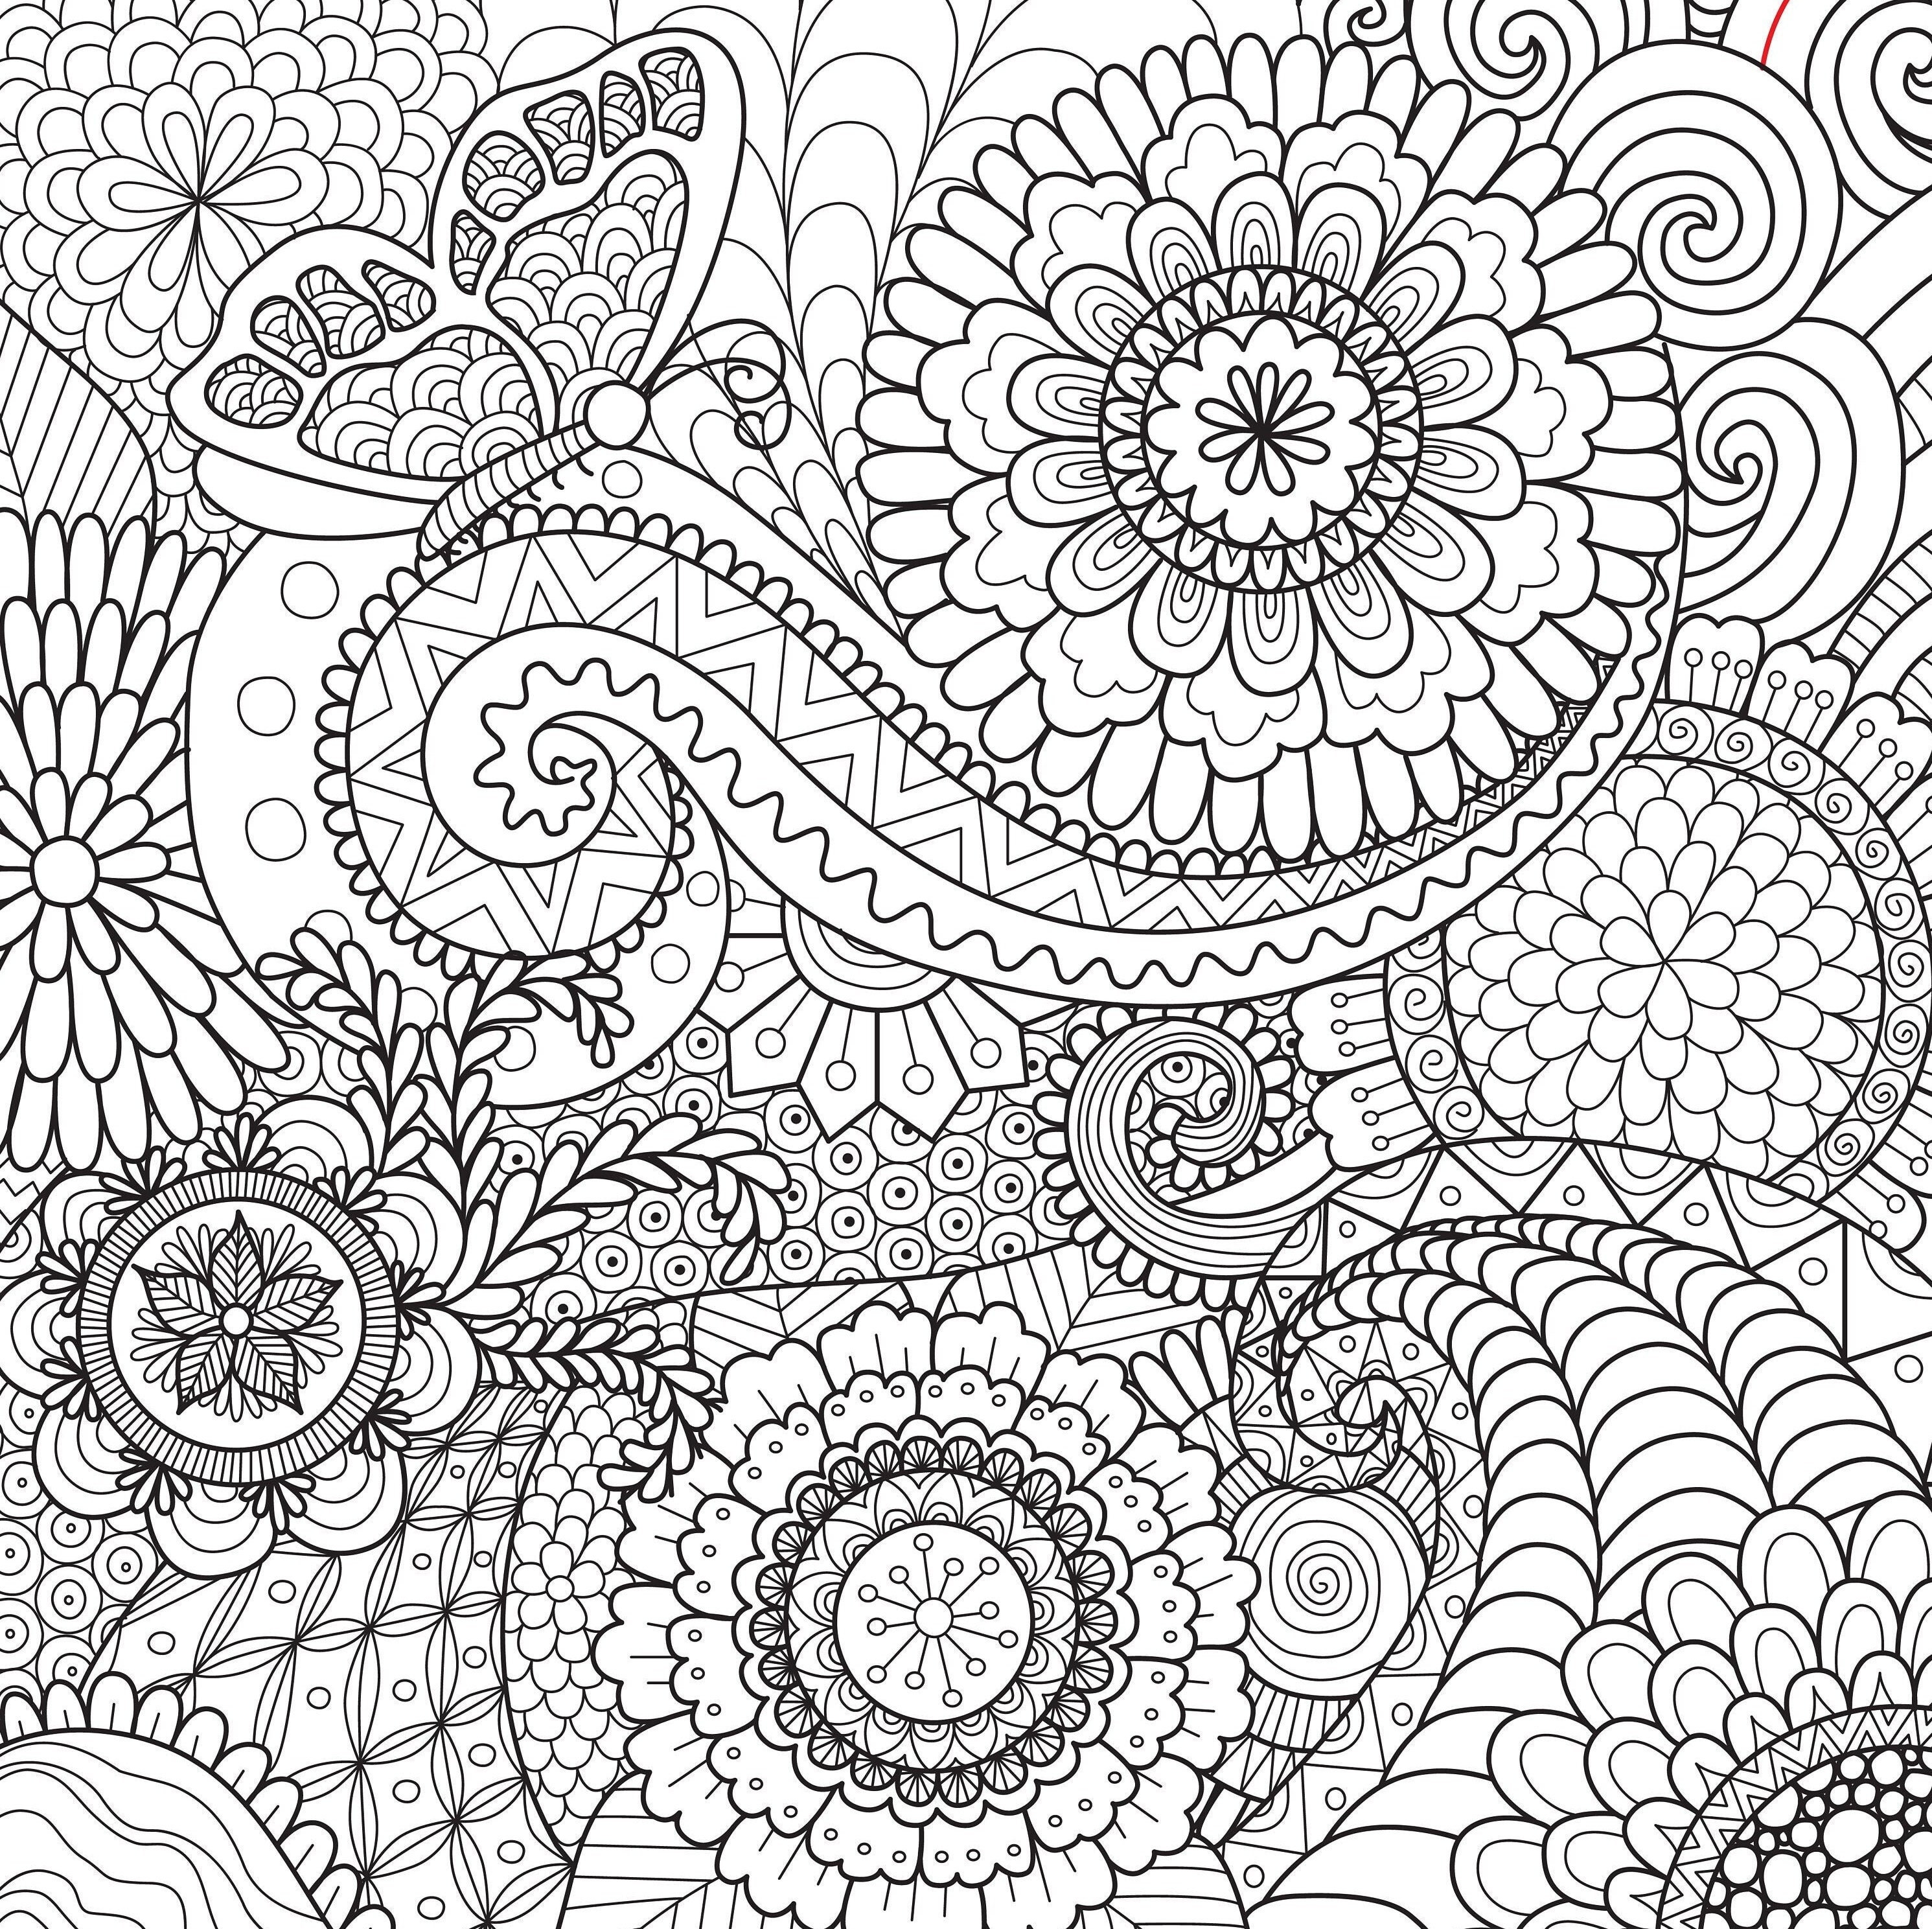 Creative coloring pages for teens and adults digital download